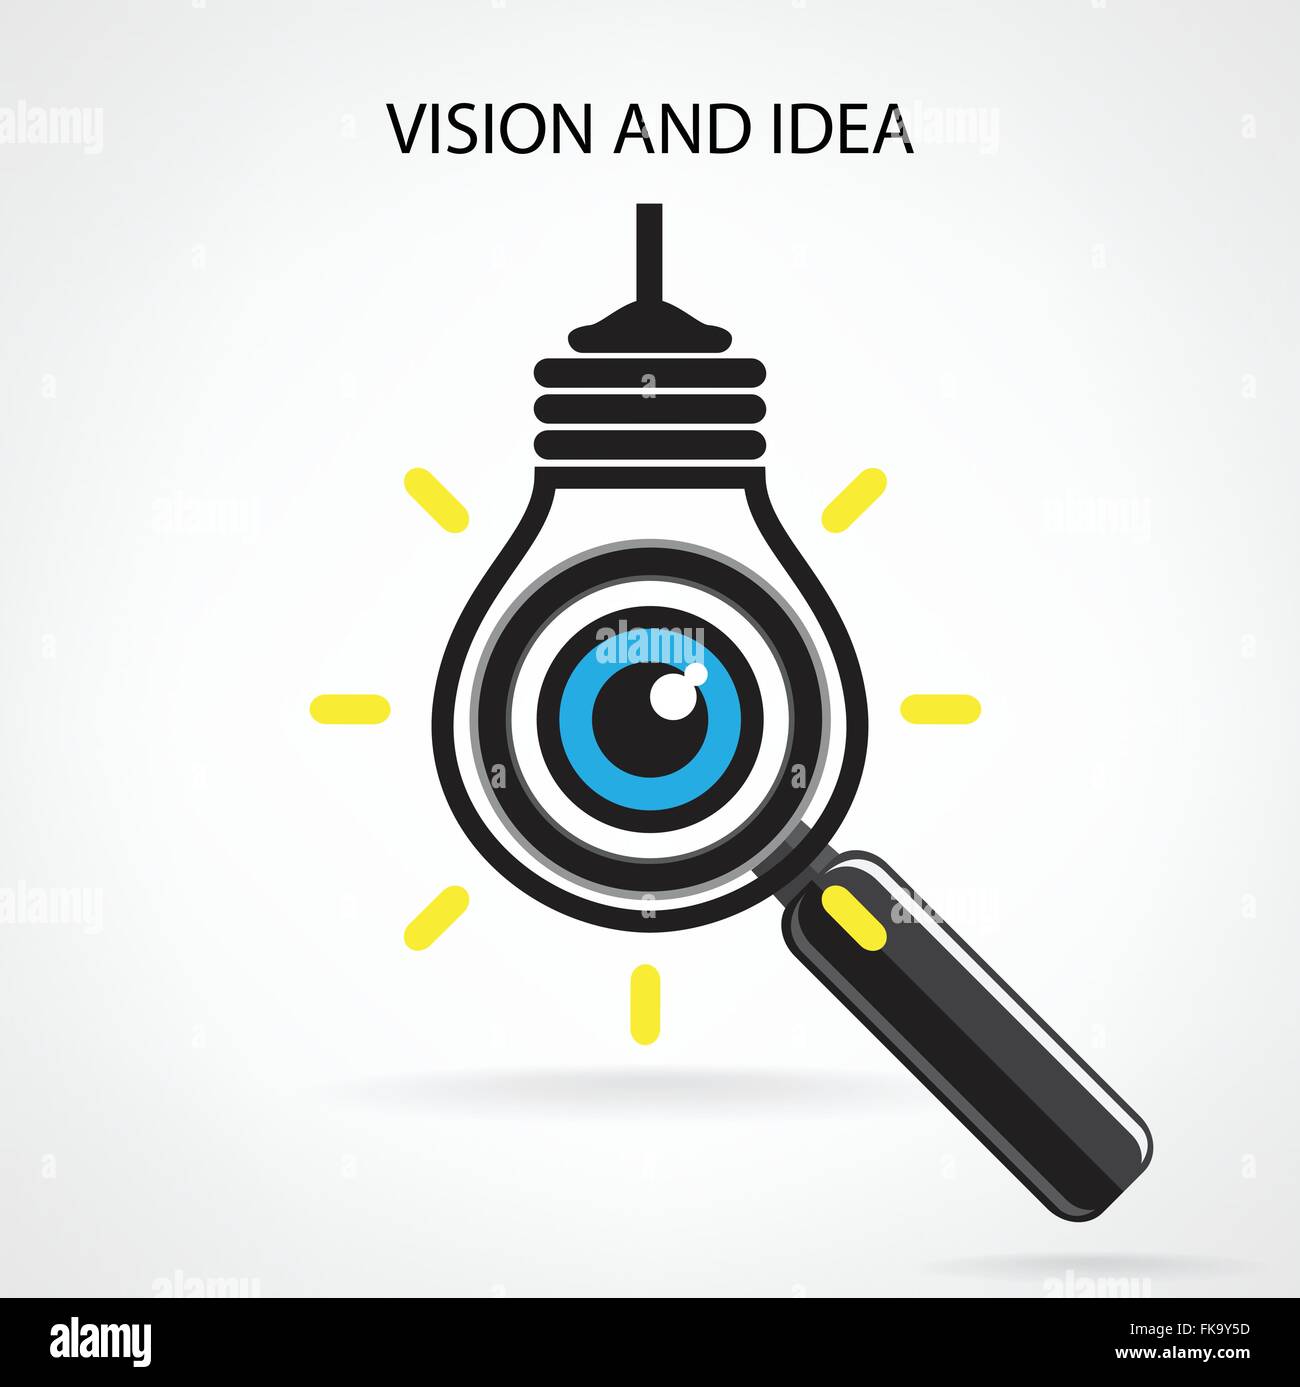 vision and ideas sign,eye icon,light bulb symbol ,search symbol,business concept.vector illustration Stock Vector